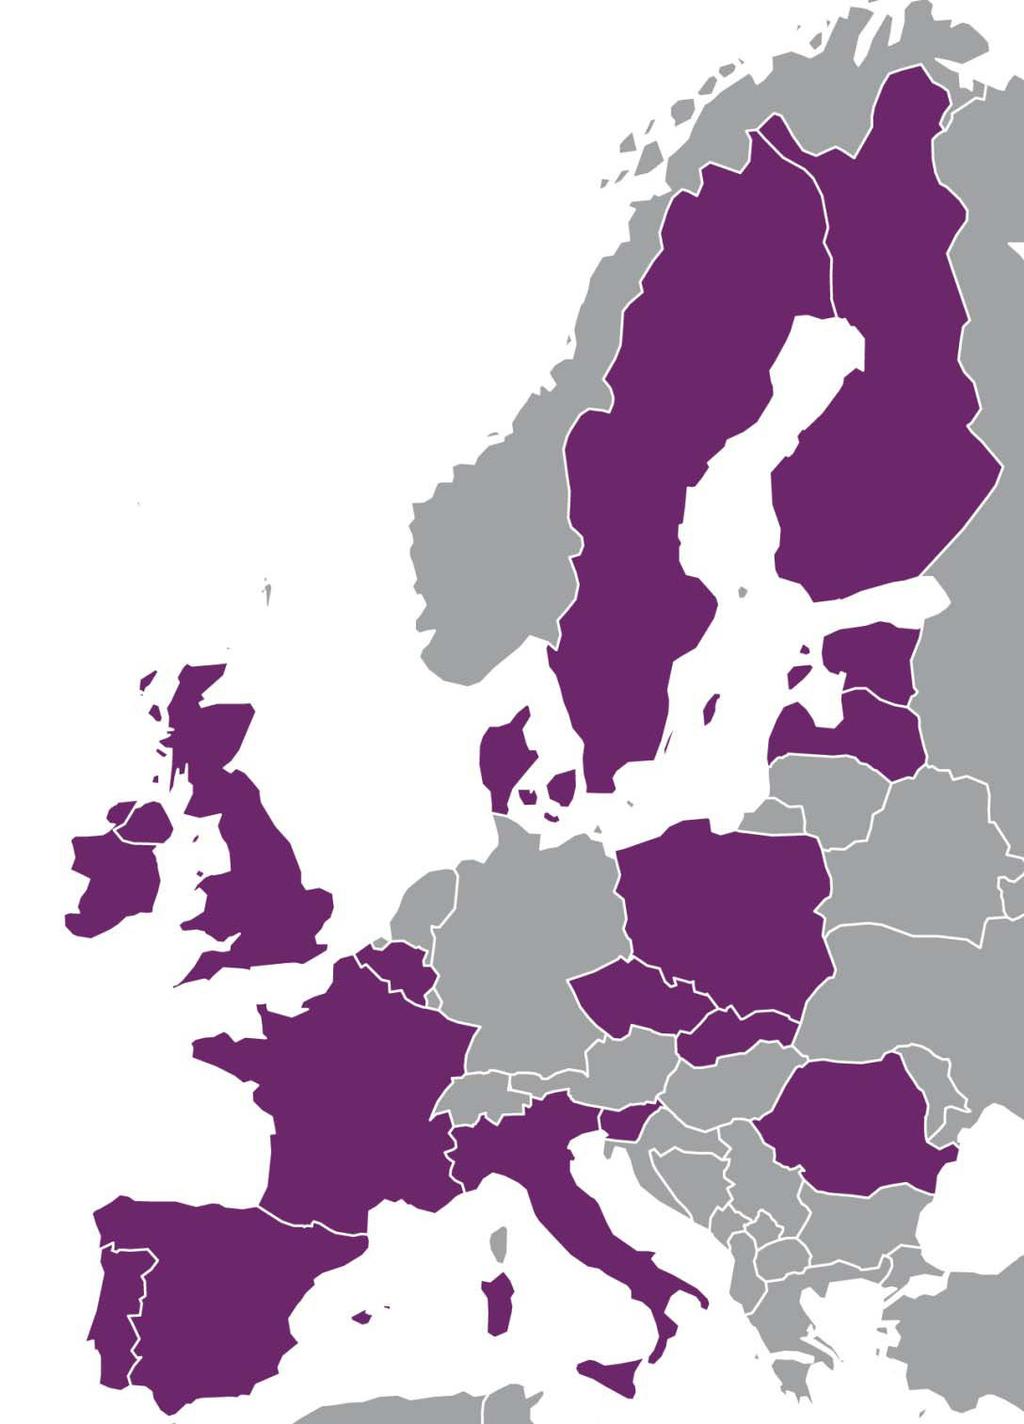 European Member States with a